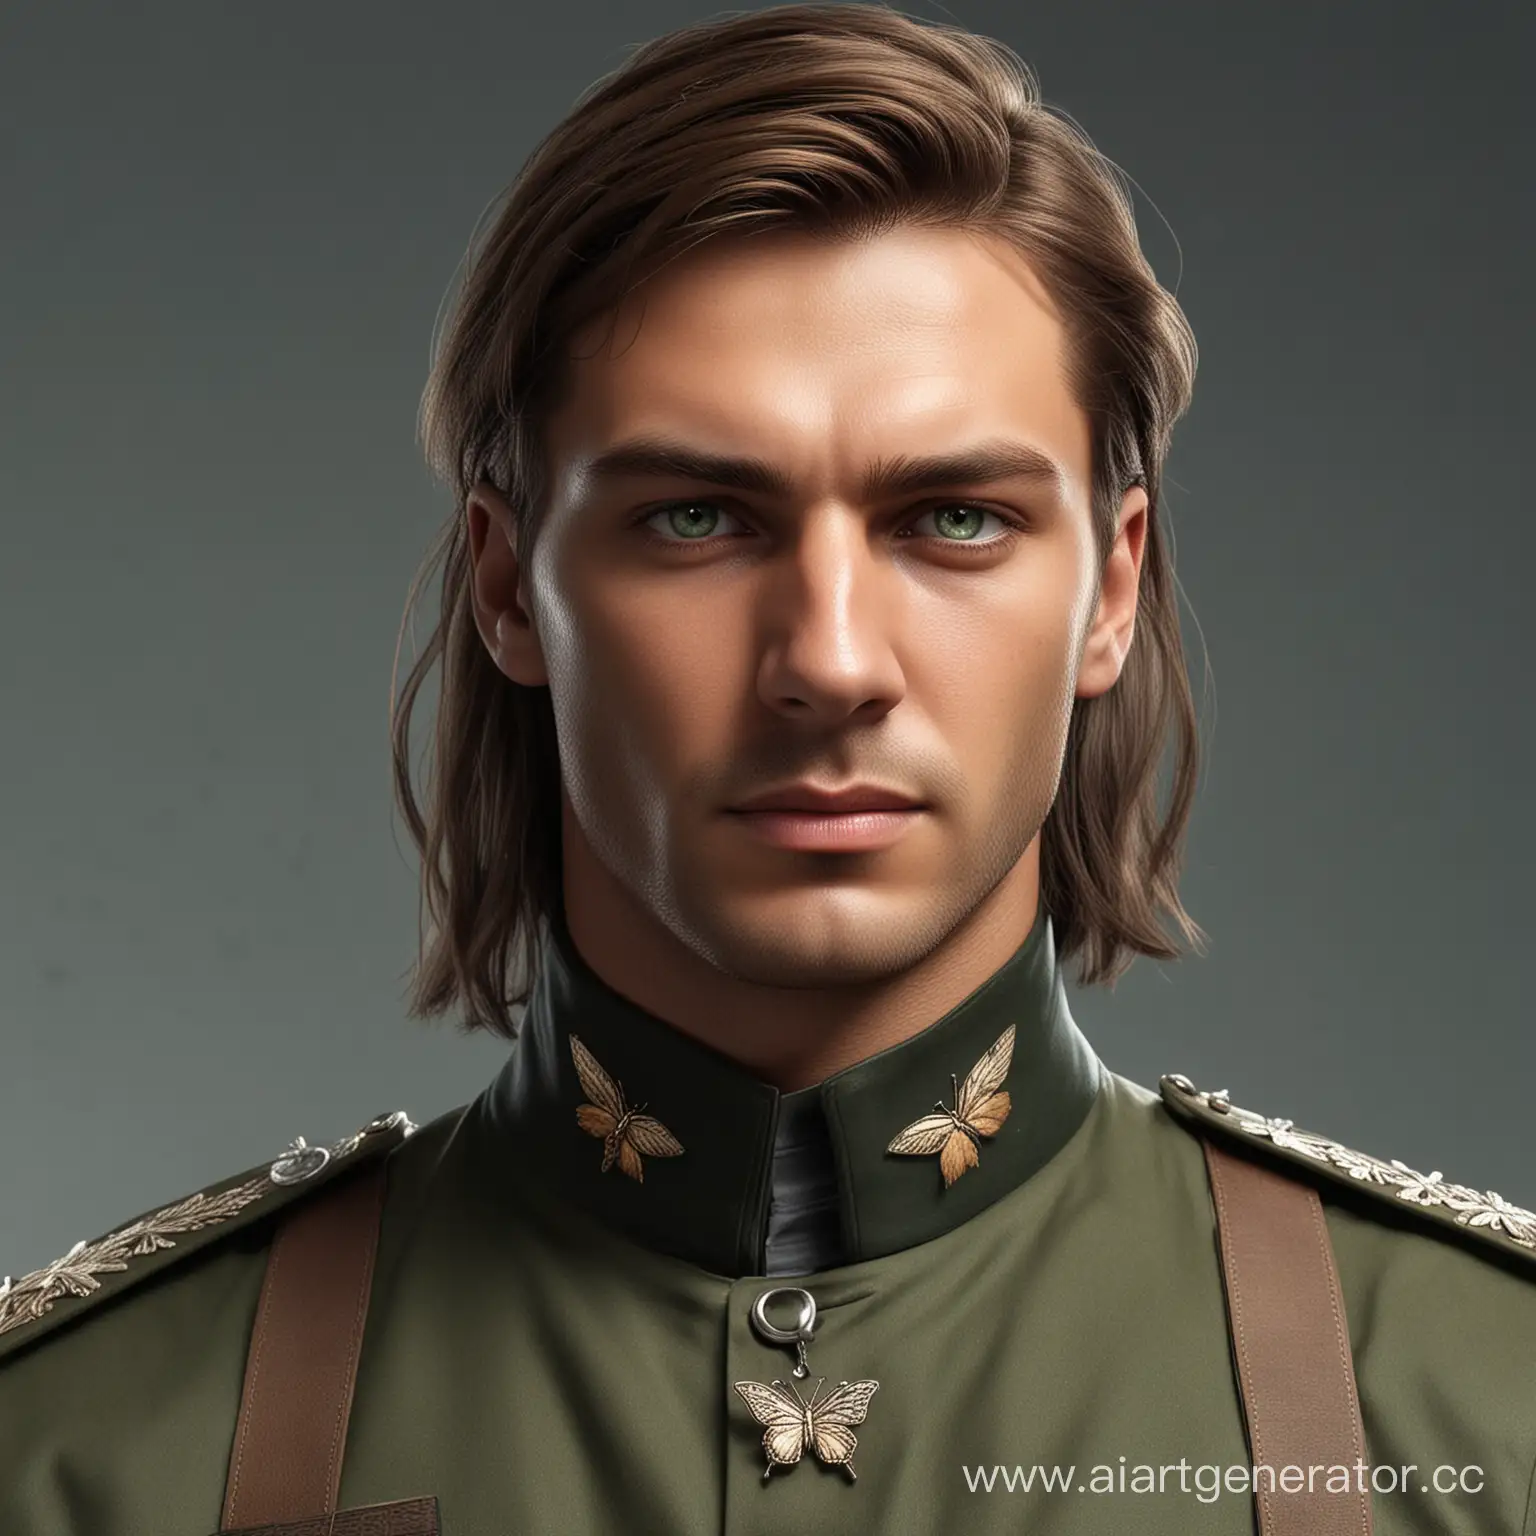 Russian-Man-in-Call-of-DutyInspired-Military-Uniform-with-Butterfly-Clip